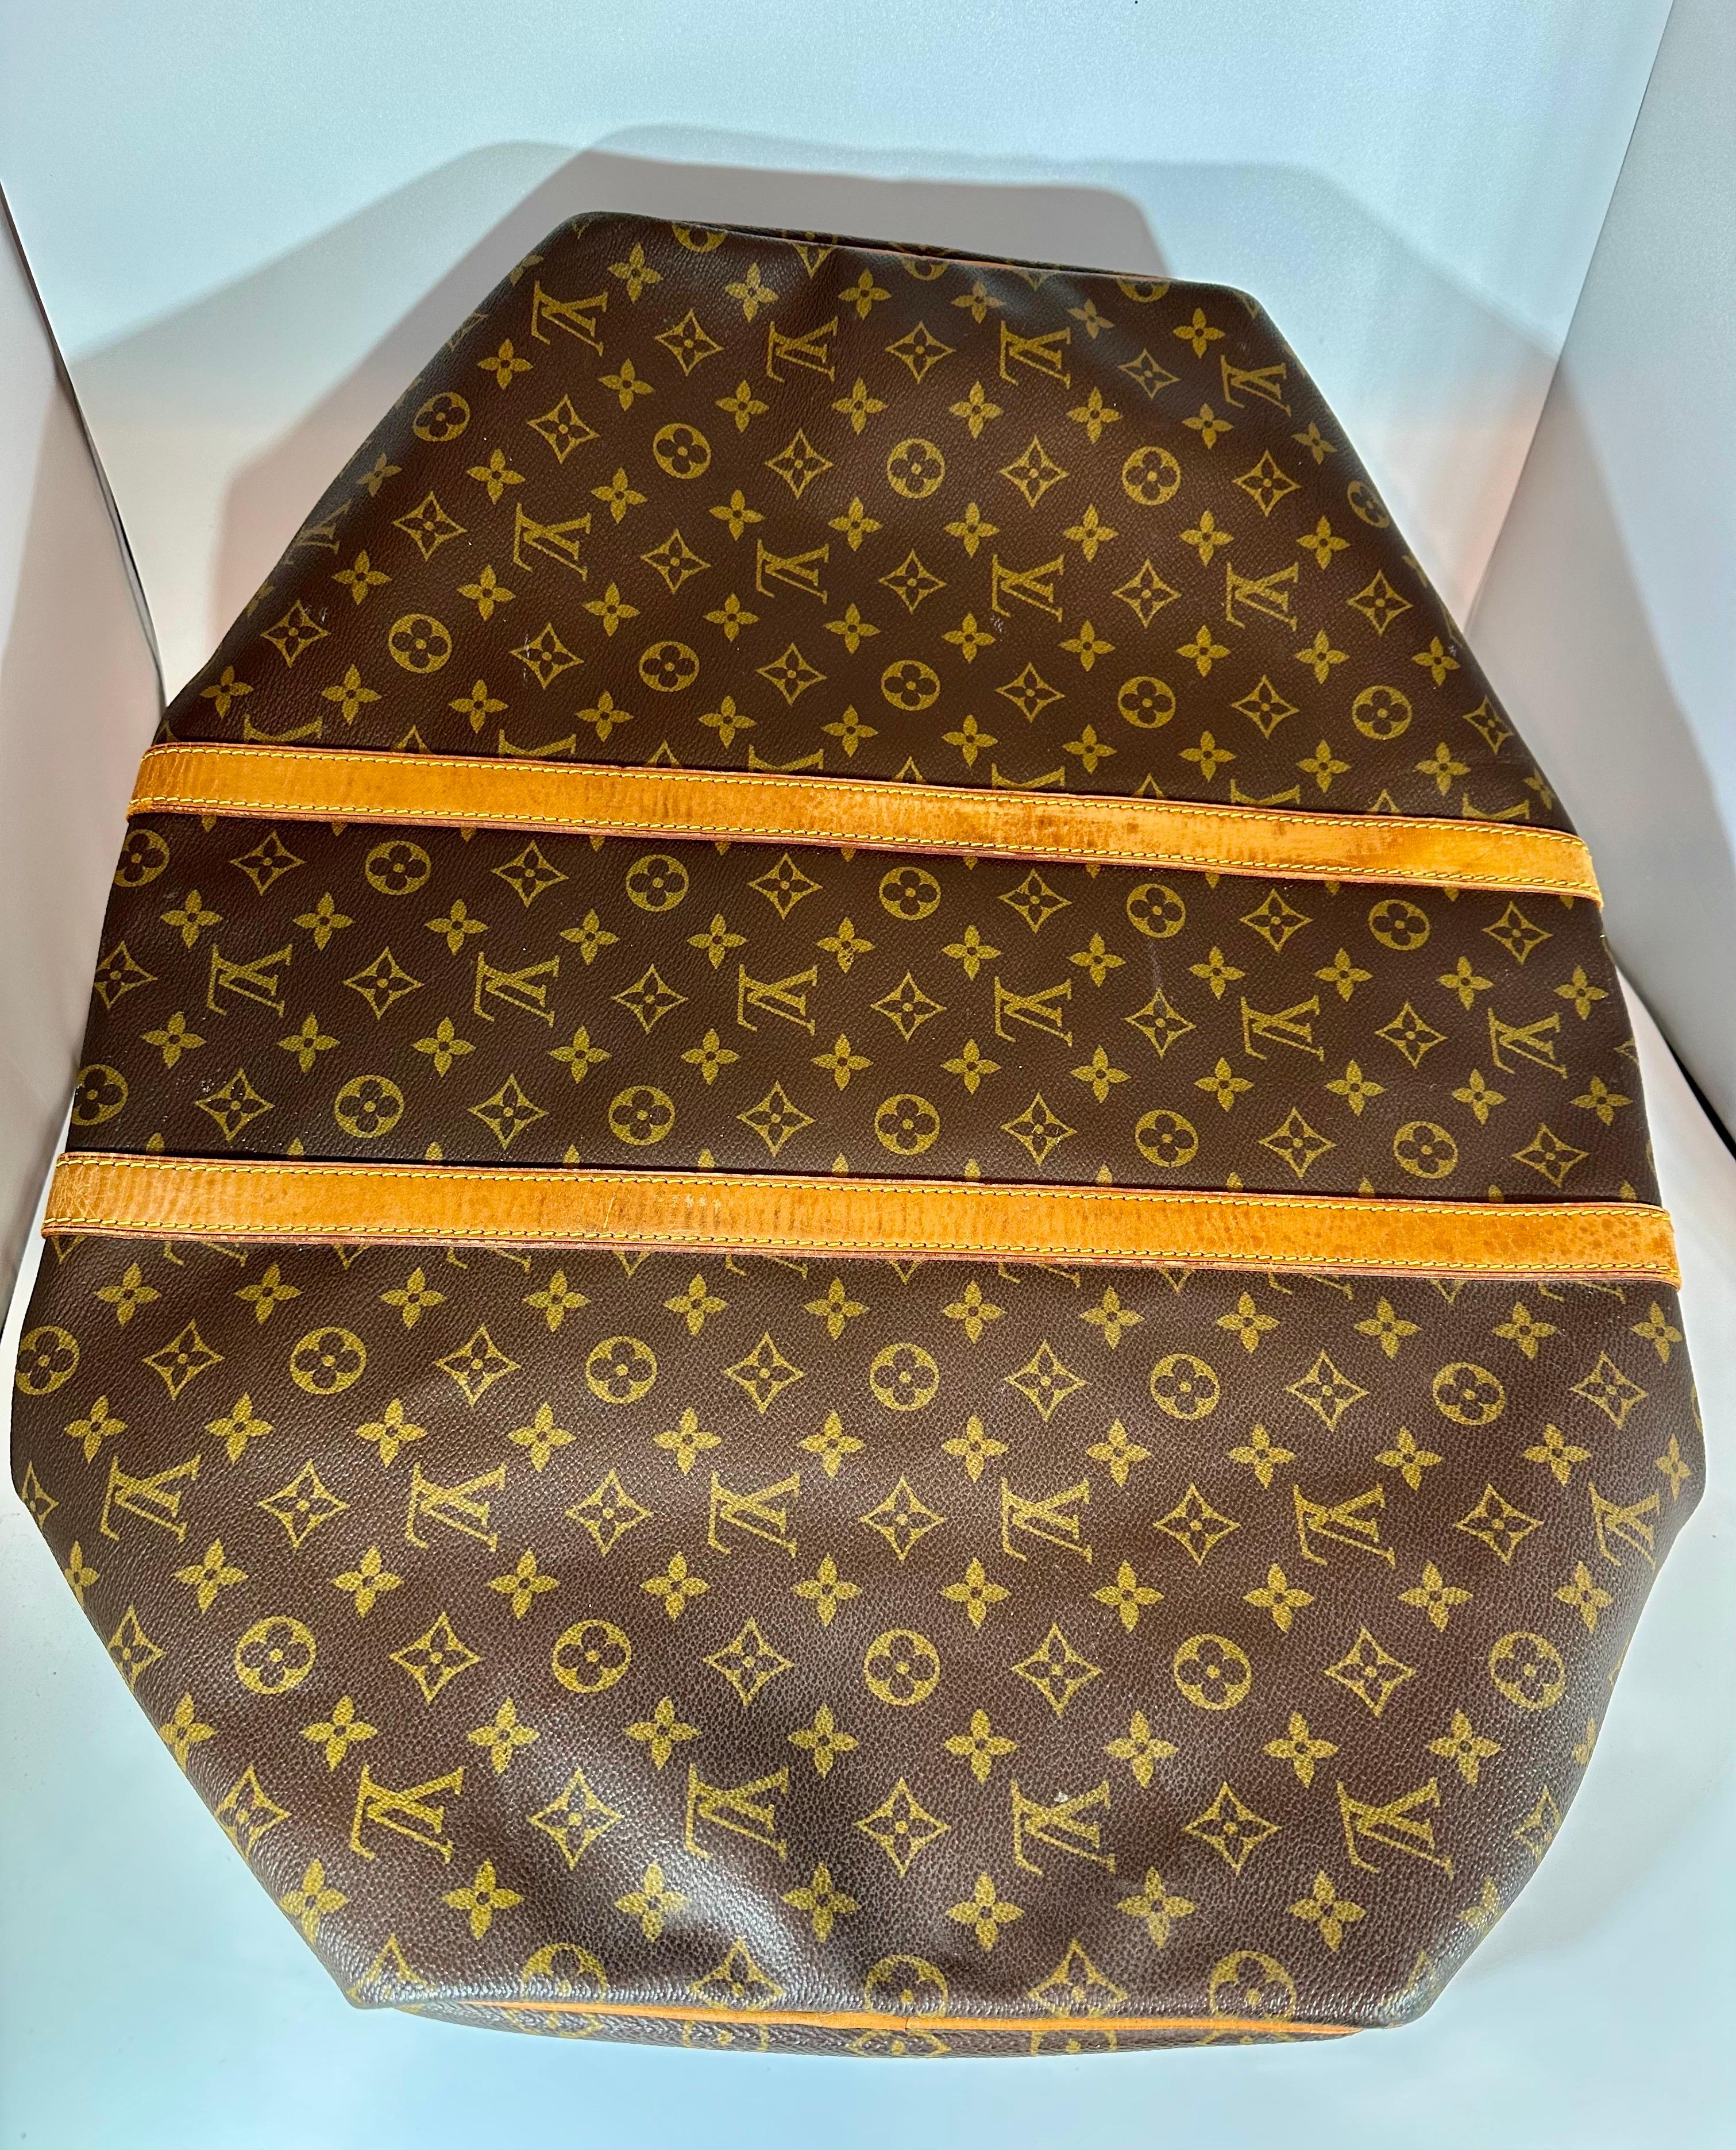 LOUIS VUITTON Brown Monogram Canvas Keepall  Luggage Bag  55 For Sale 8